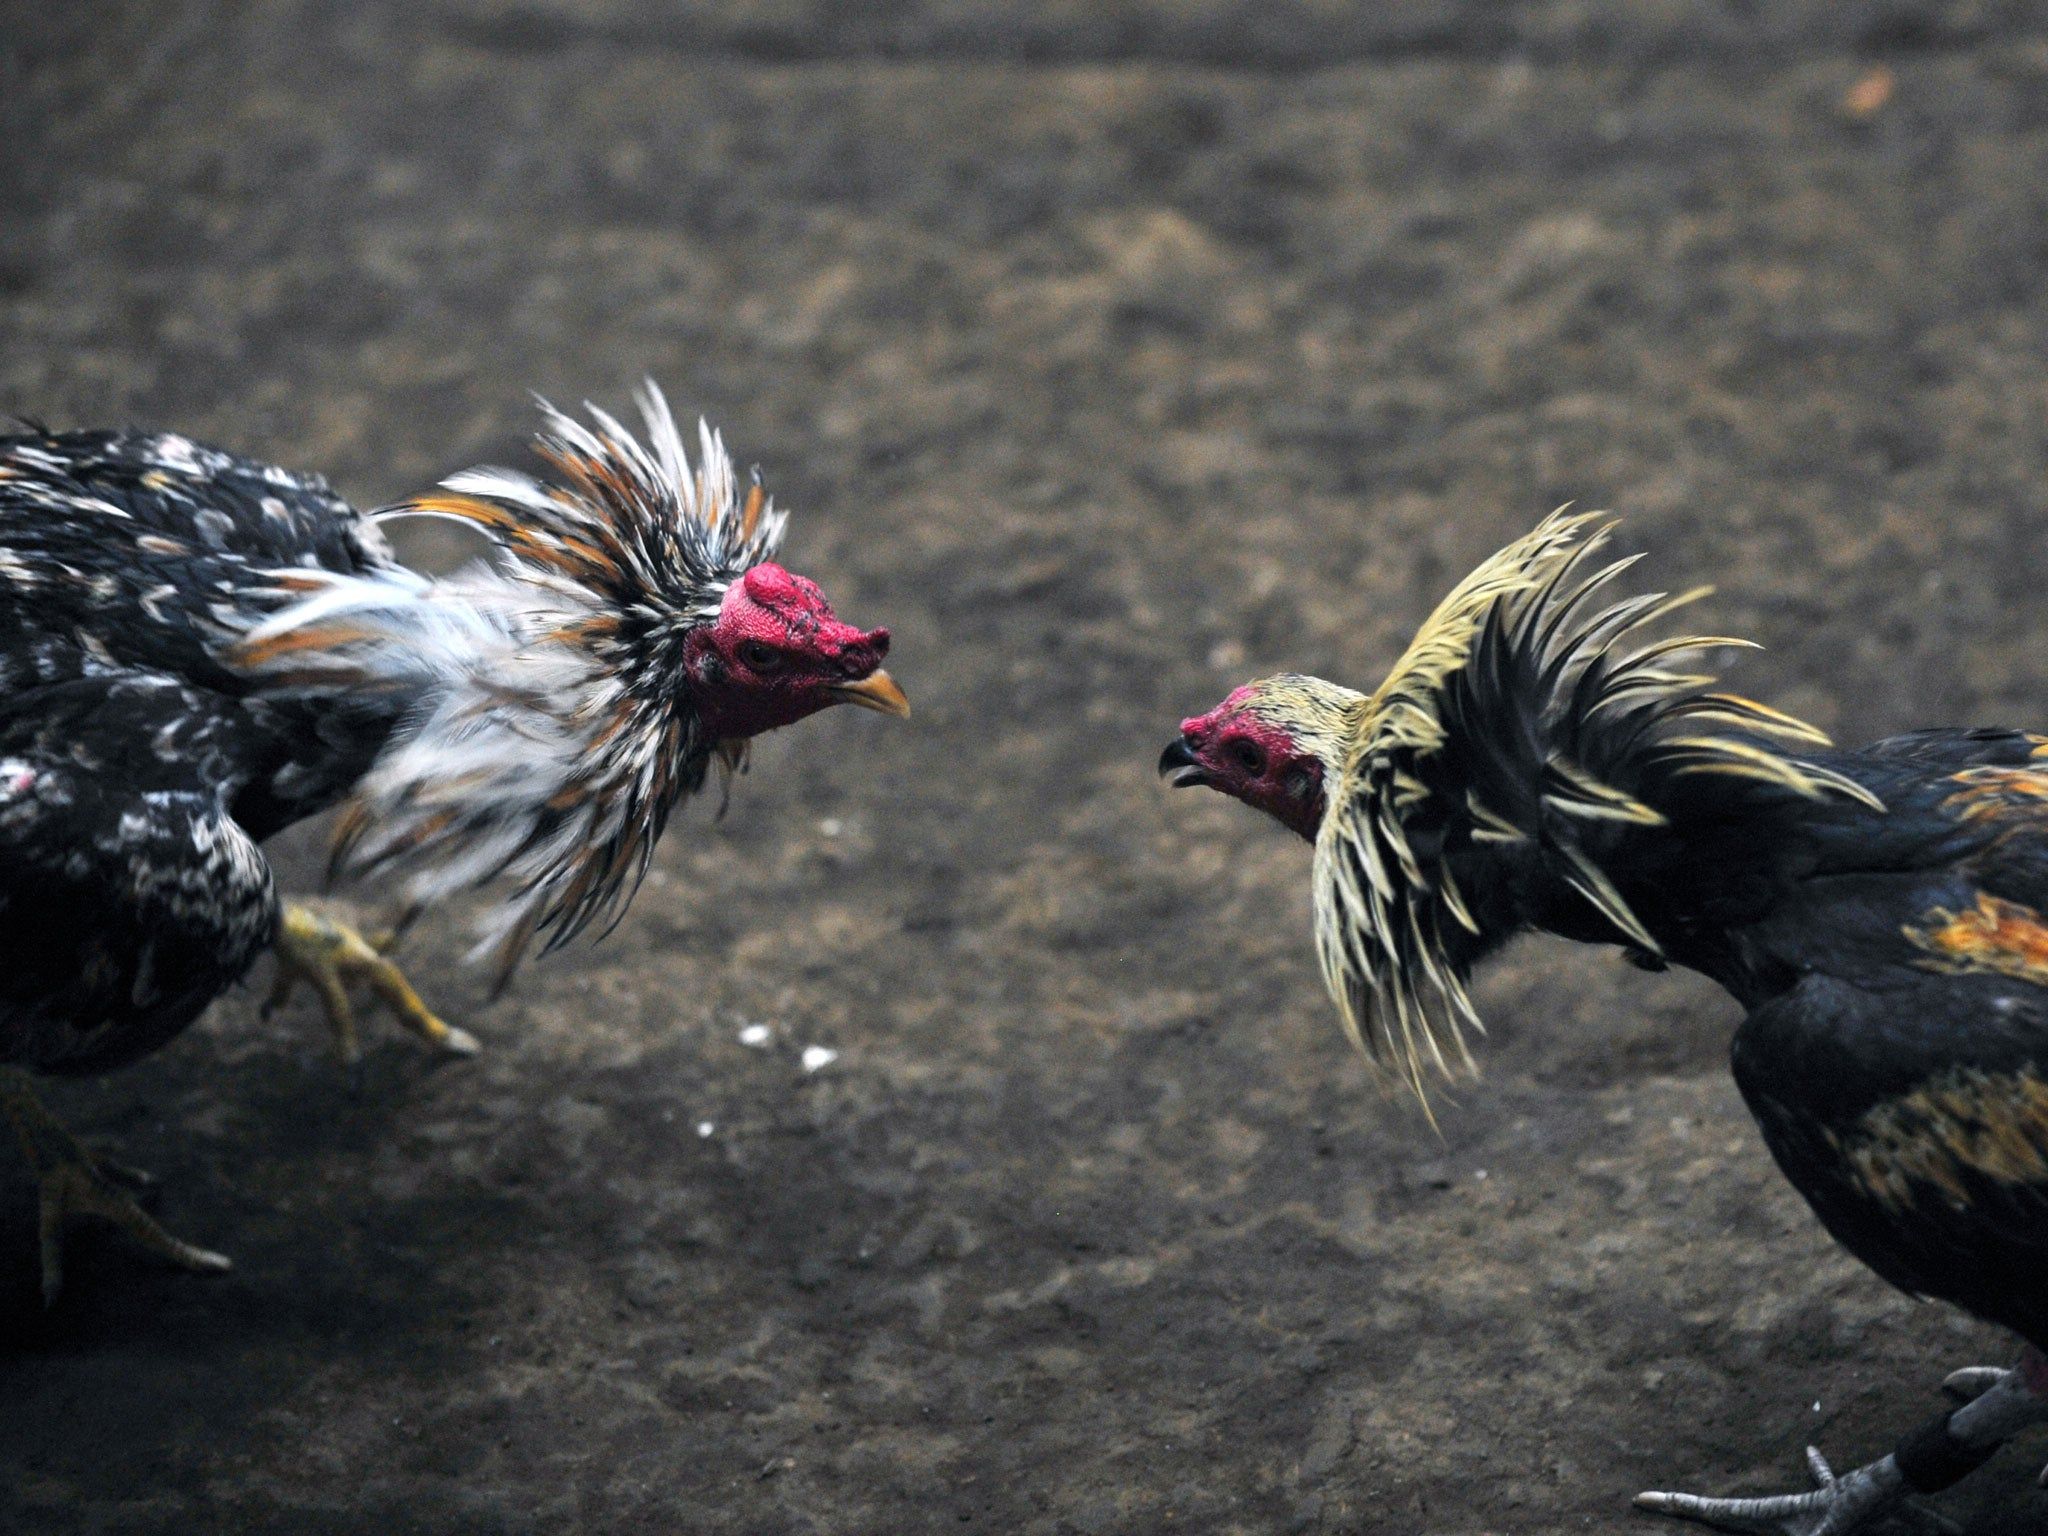 The Magnificent Photographs of Roosters During Fighting Looking so good   Rooster Fighting rooster Beautiful chickens